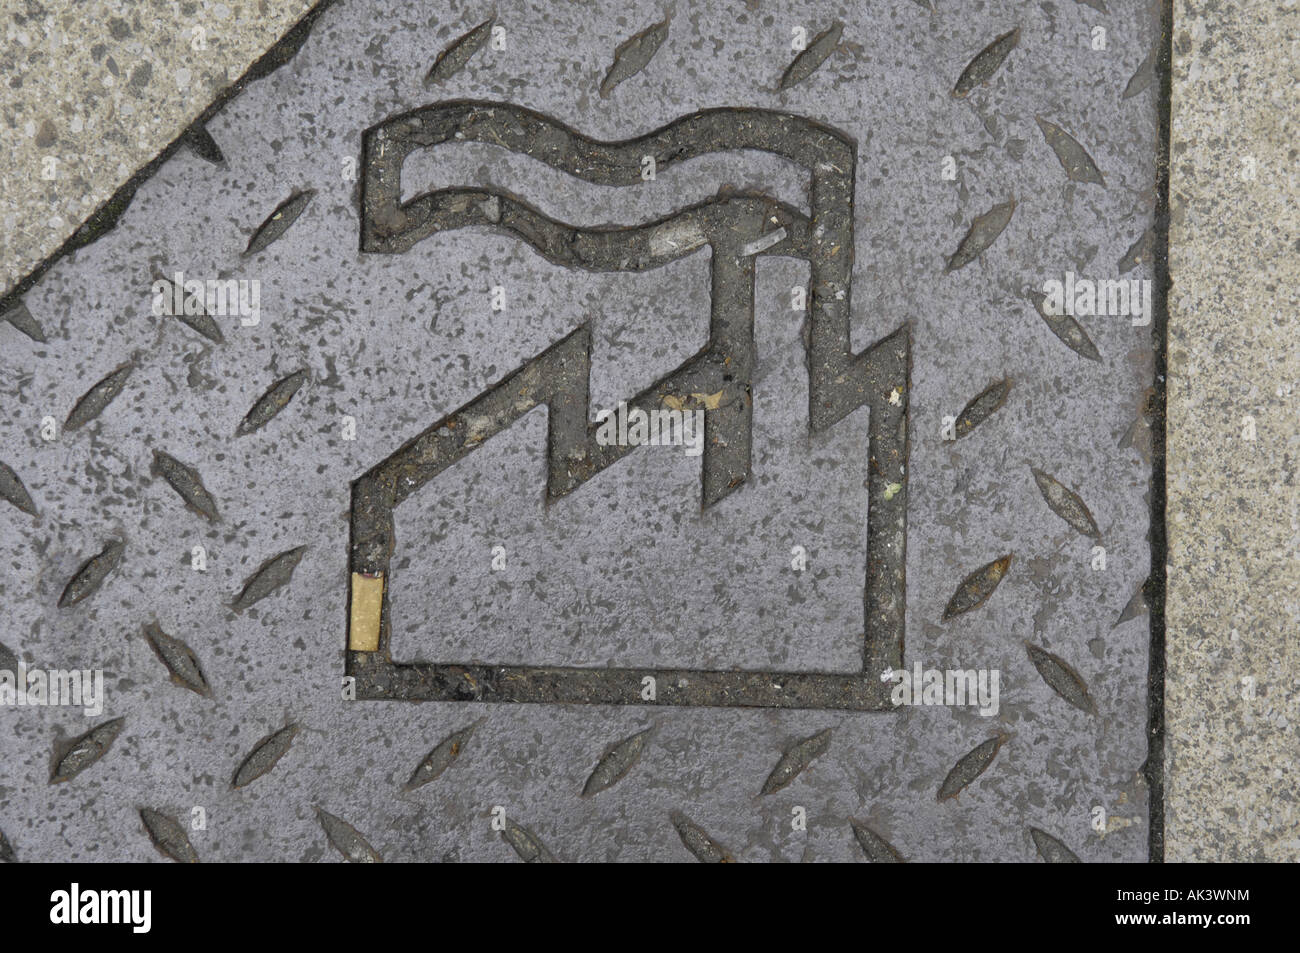 factory records logo brand oldham street pavement manchester uk england popular culture music madchester Stock Photo